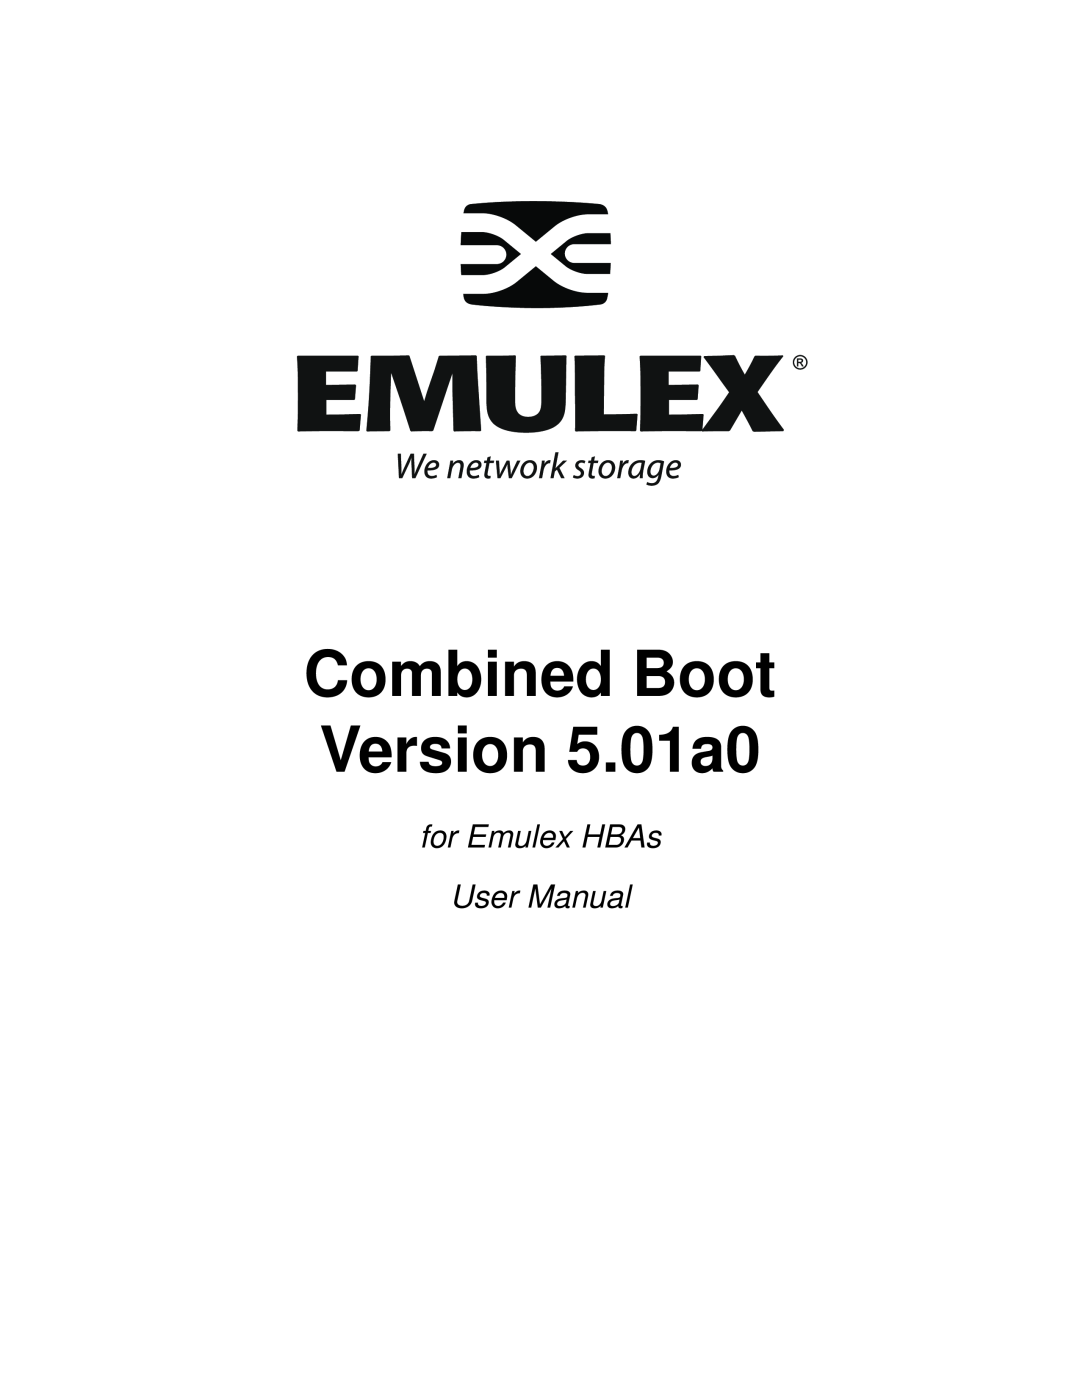 IBM user manual Combined Boot Version 5.01a0 